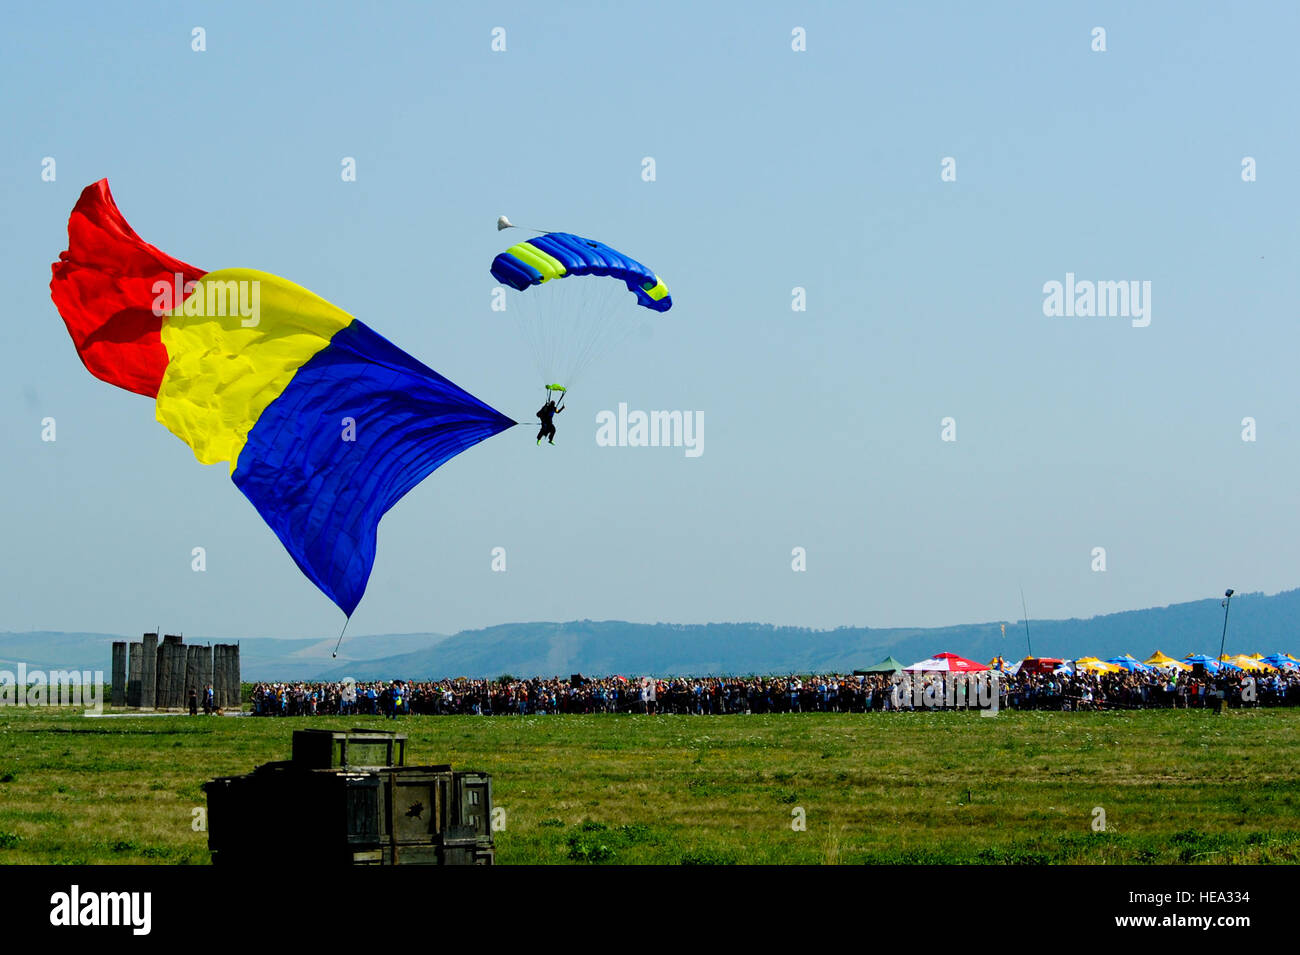 A parachutist floats to the ground while bearing a large Romanian flag before hundreds of spectators during the Romanian air force's 71st Air Base's air show and open house at Campia Turzii, Romania, July 23, 2016. The aviation demonstration took place during the middle of the U.S. Air Force's 194th Expeditionary Fighter Squadron's six-month long theater security package deployment to Europe in support of Operation Atlantic Resolve, which aims to bolster the U.S.'s continued commitment to the collective security of NATO and dedication to the enduring peace and stability in the region. The unit Stock Photo